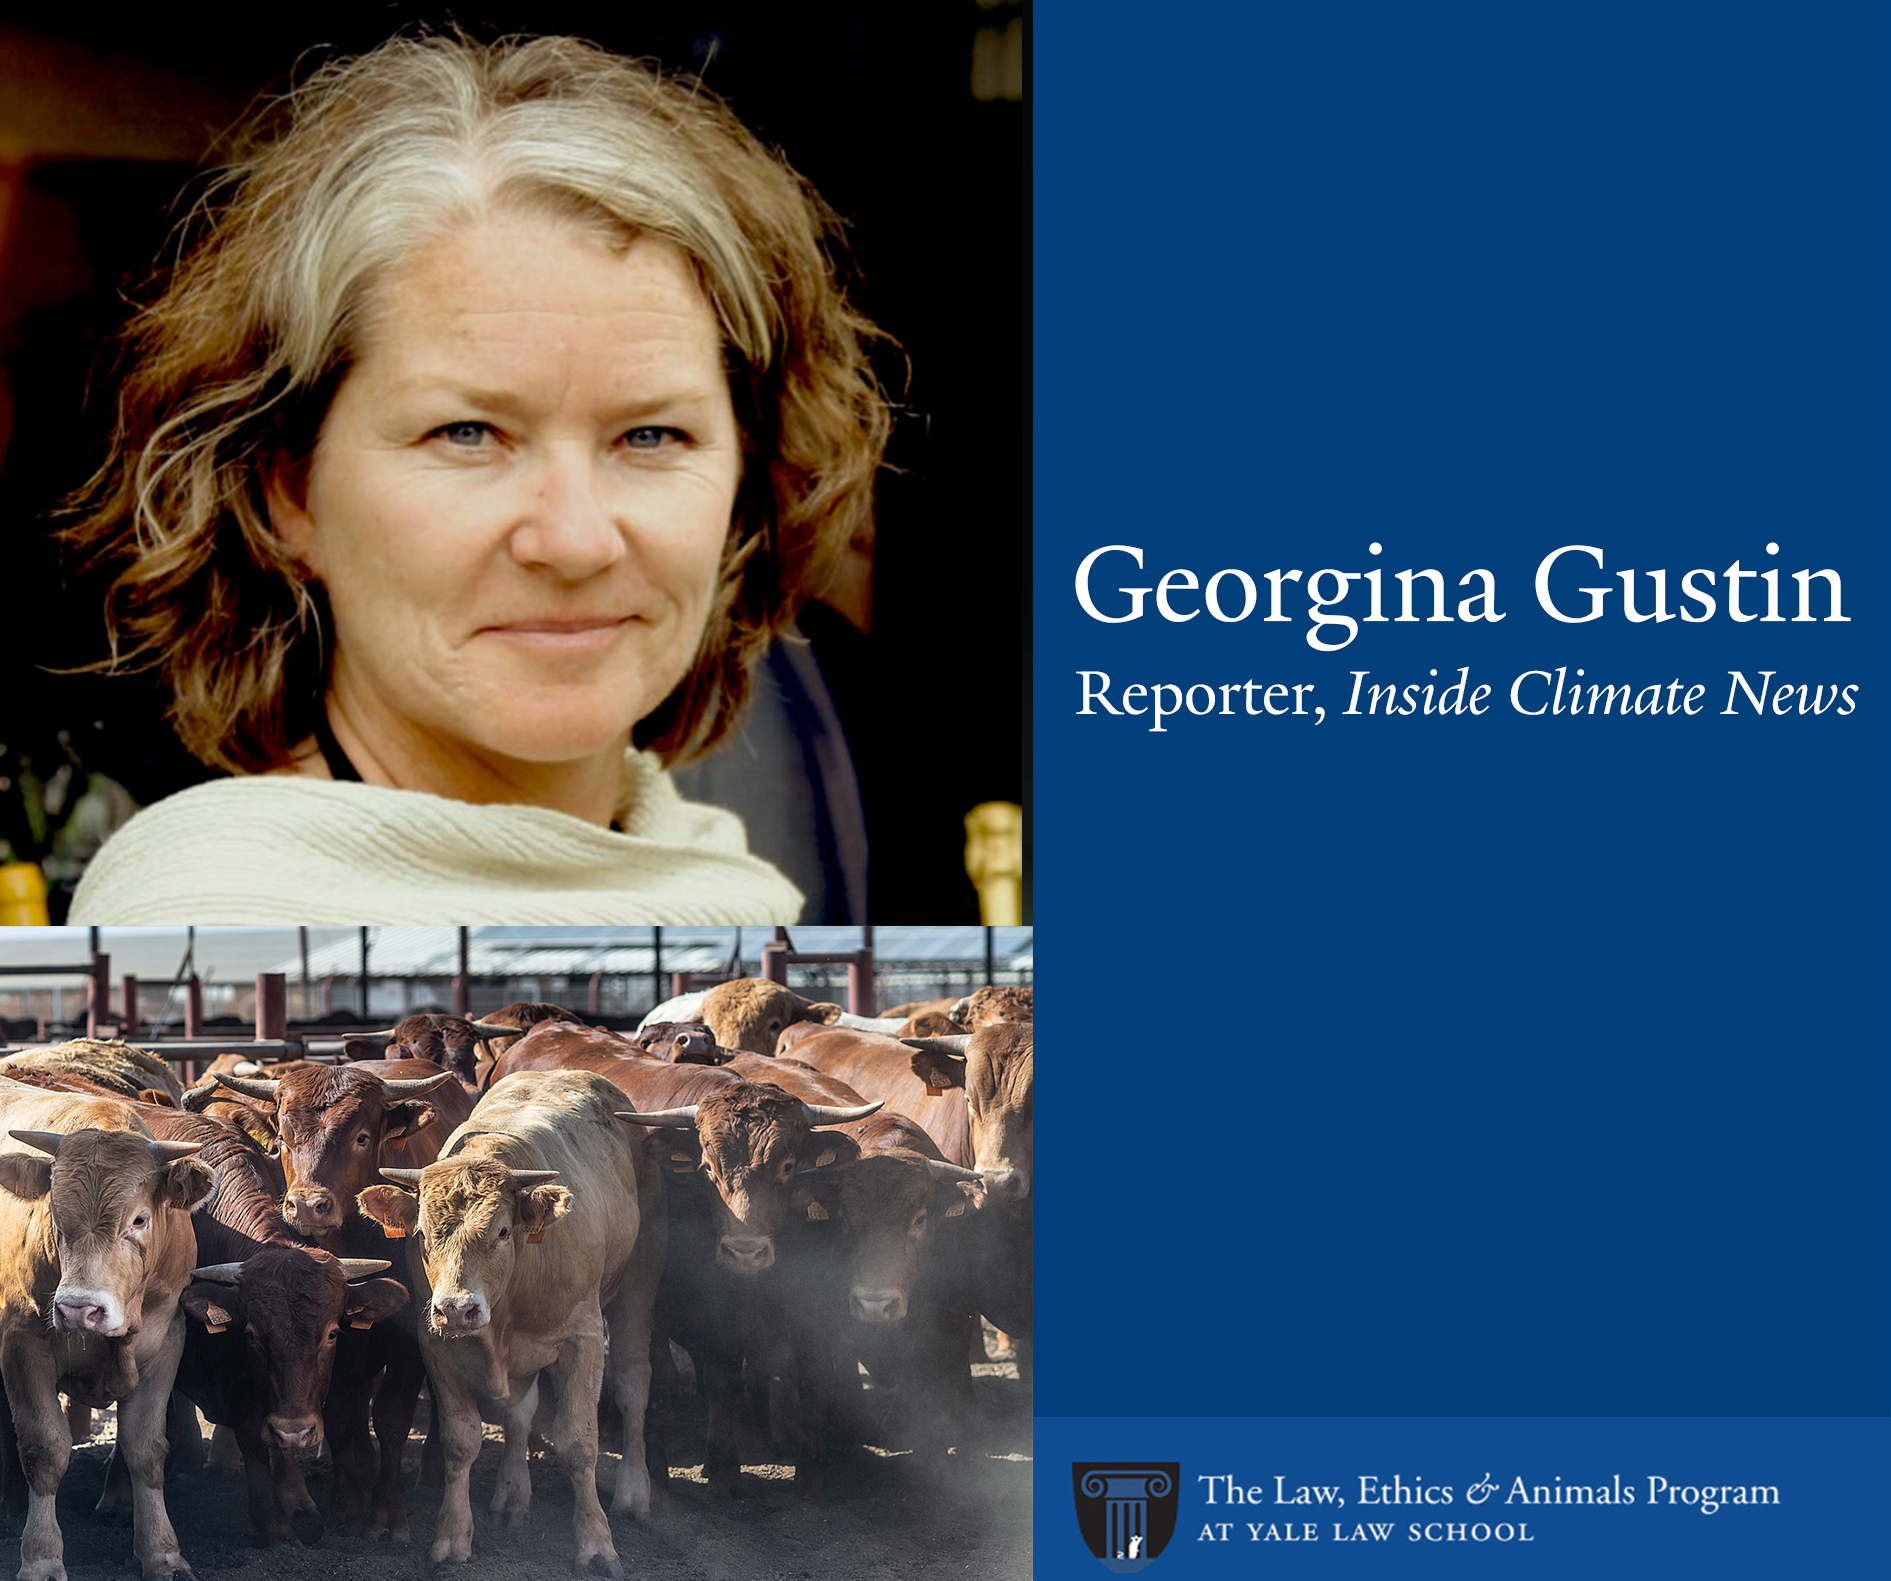 Text: Reporter Georgina Gustin, Inside Climate News. Photos: 1. Gustin 2. A herd of cattle